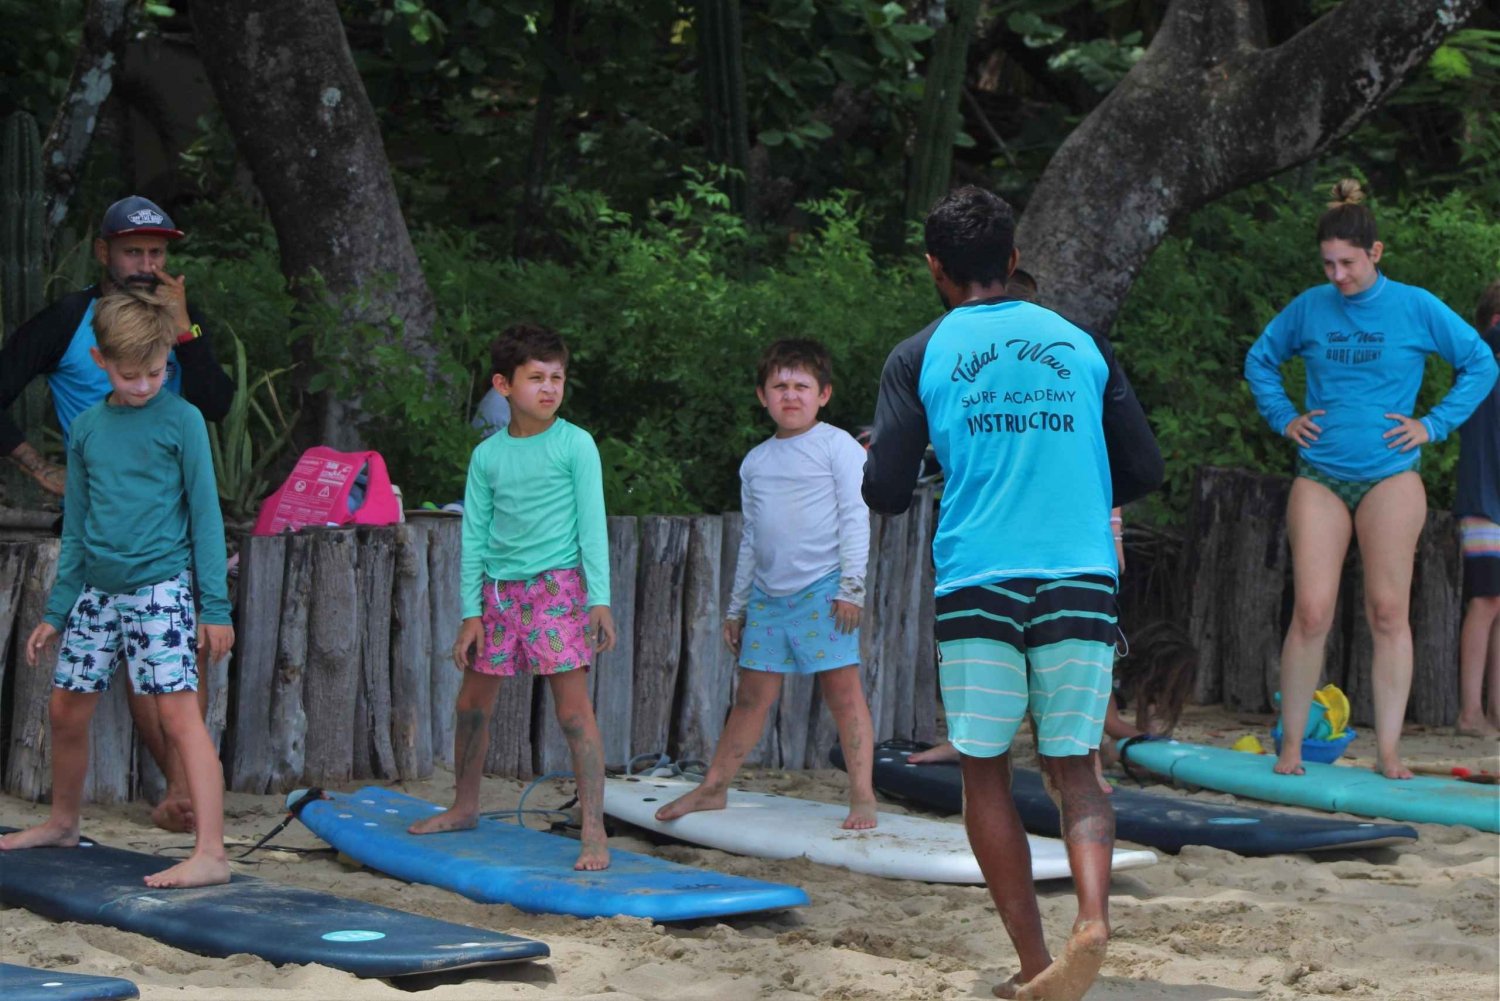 Surf Lessons in Tamarindo by Tidal Wave Surf Academy